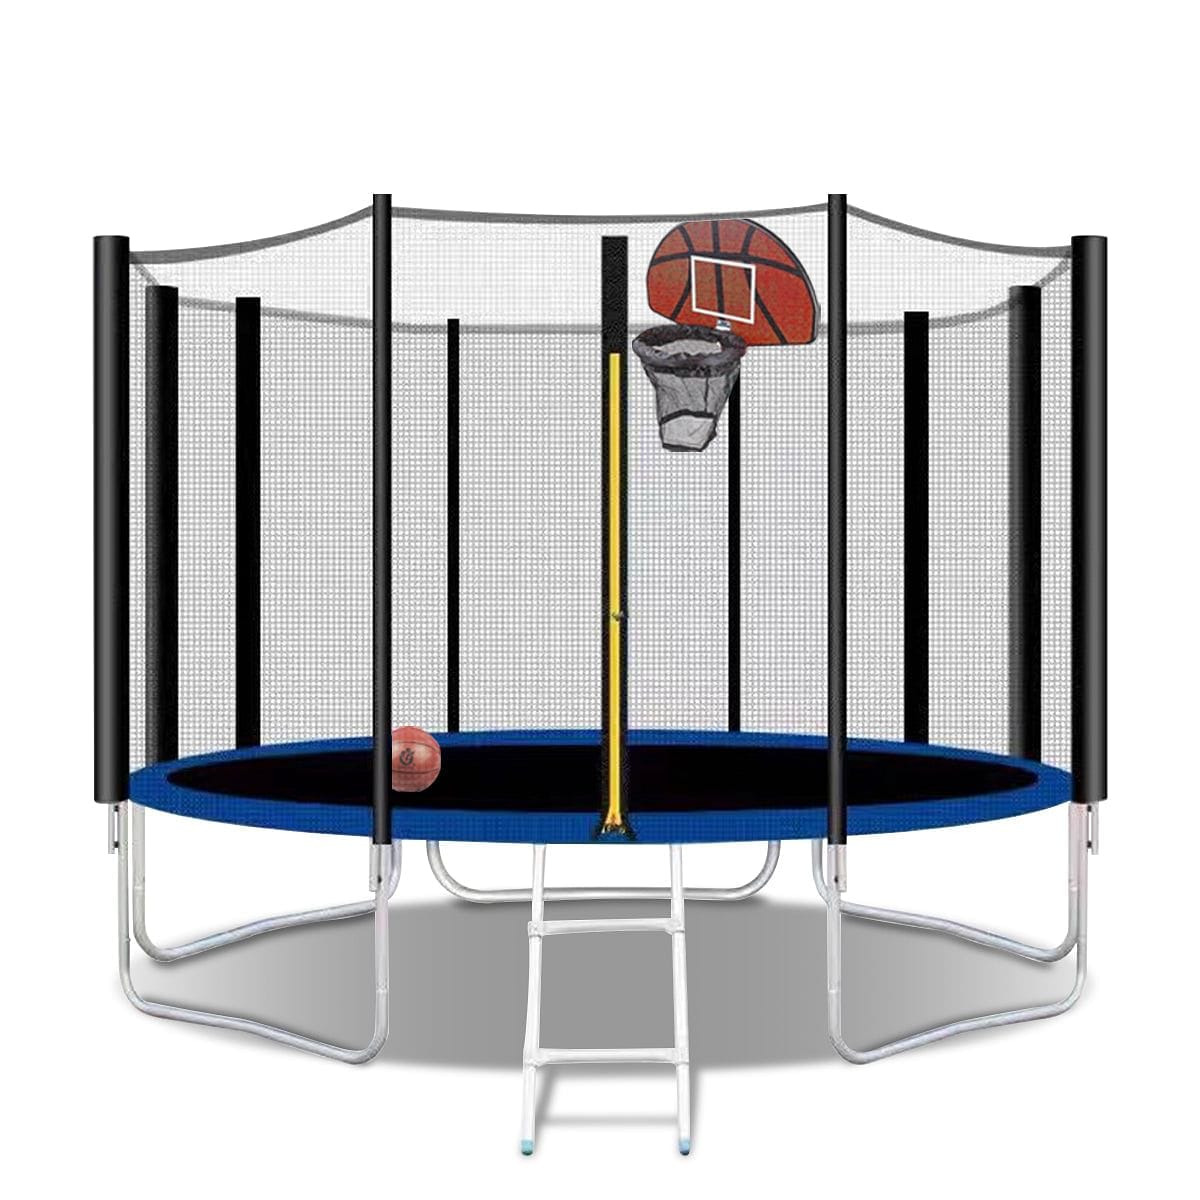 12FT Trampoline with Basketball Hoop-Kids Trampoline with Trampoline Accessories: Trampoline Ladder, Safety Trampoline Net, Spring Cover Padding